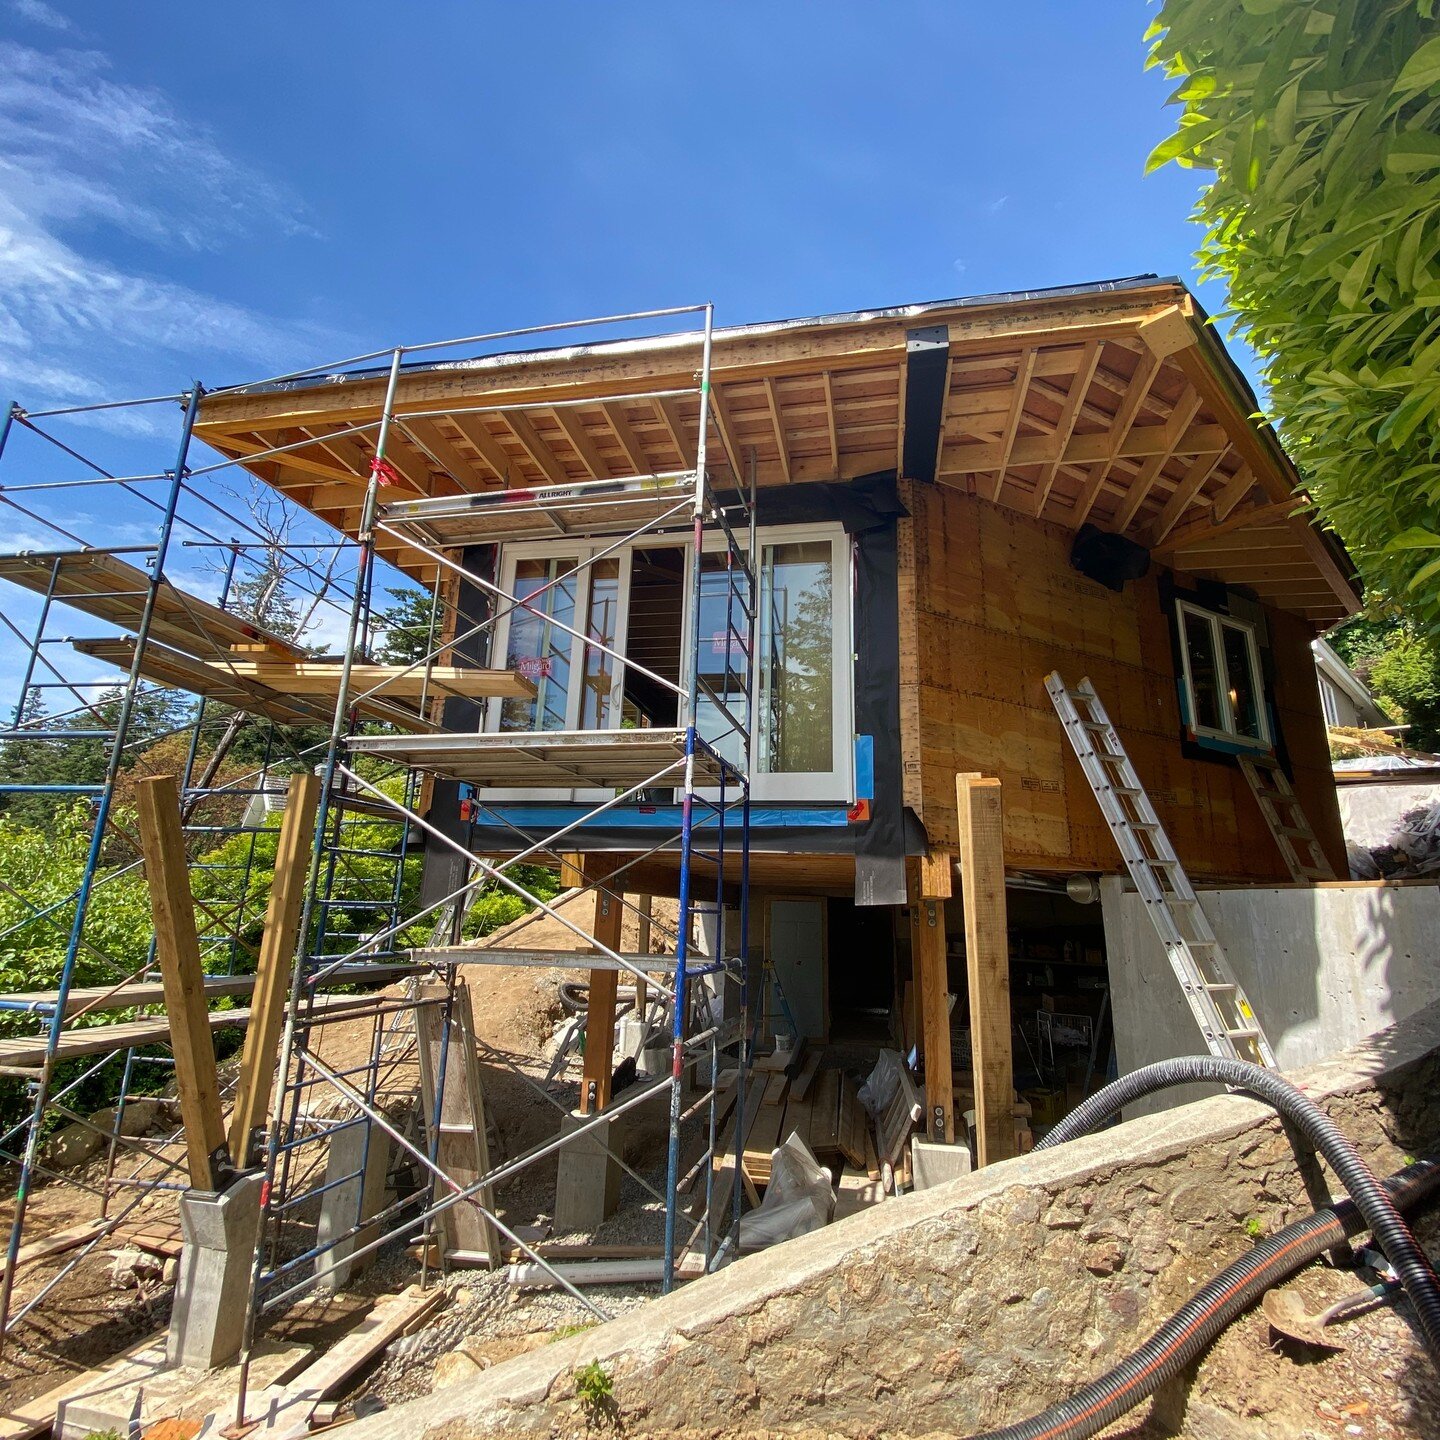 A well designed overhang is where it's at - shade on the #bluebird ☀️ days and protection on the #atmosphericriver 🌧️ days. The roof on our Horseshoe Bay project does those things and more, all while looking good 😎